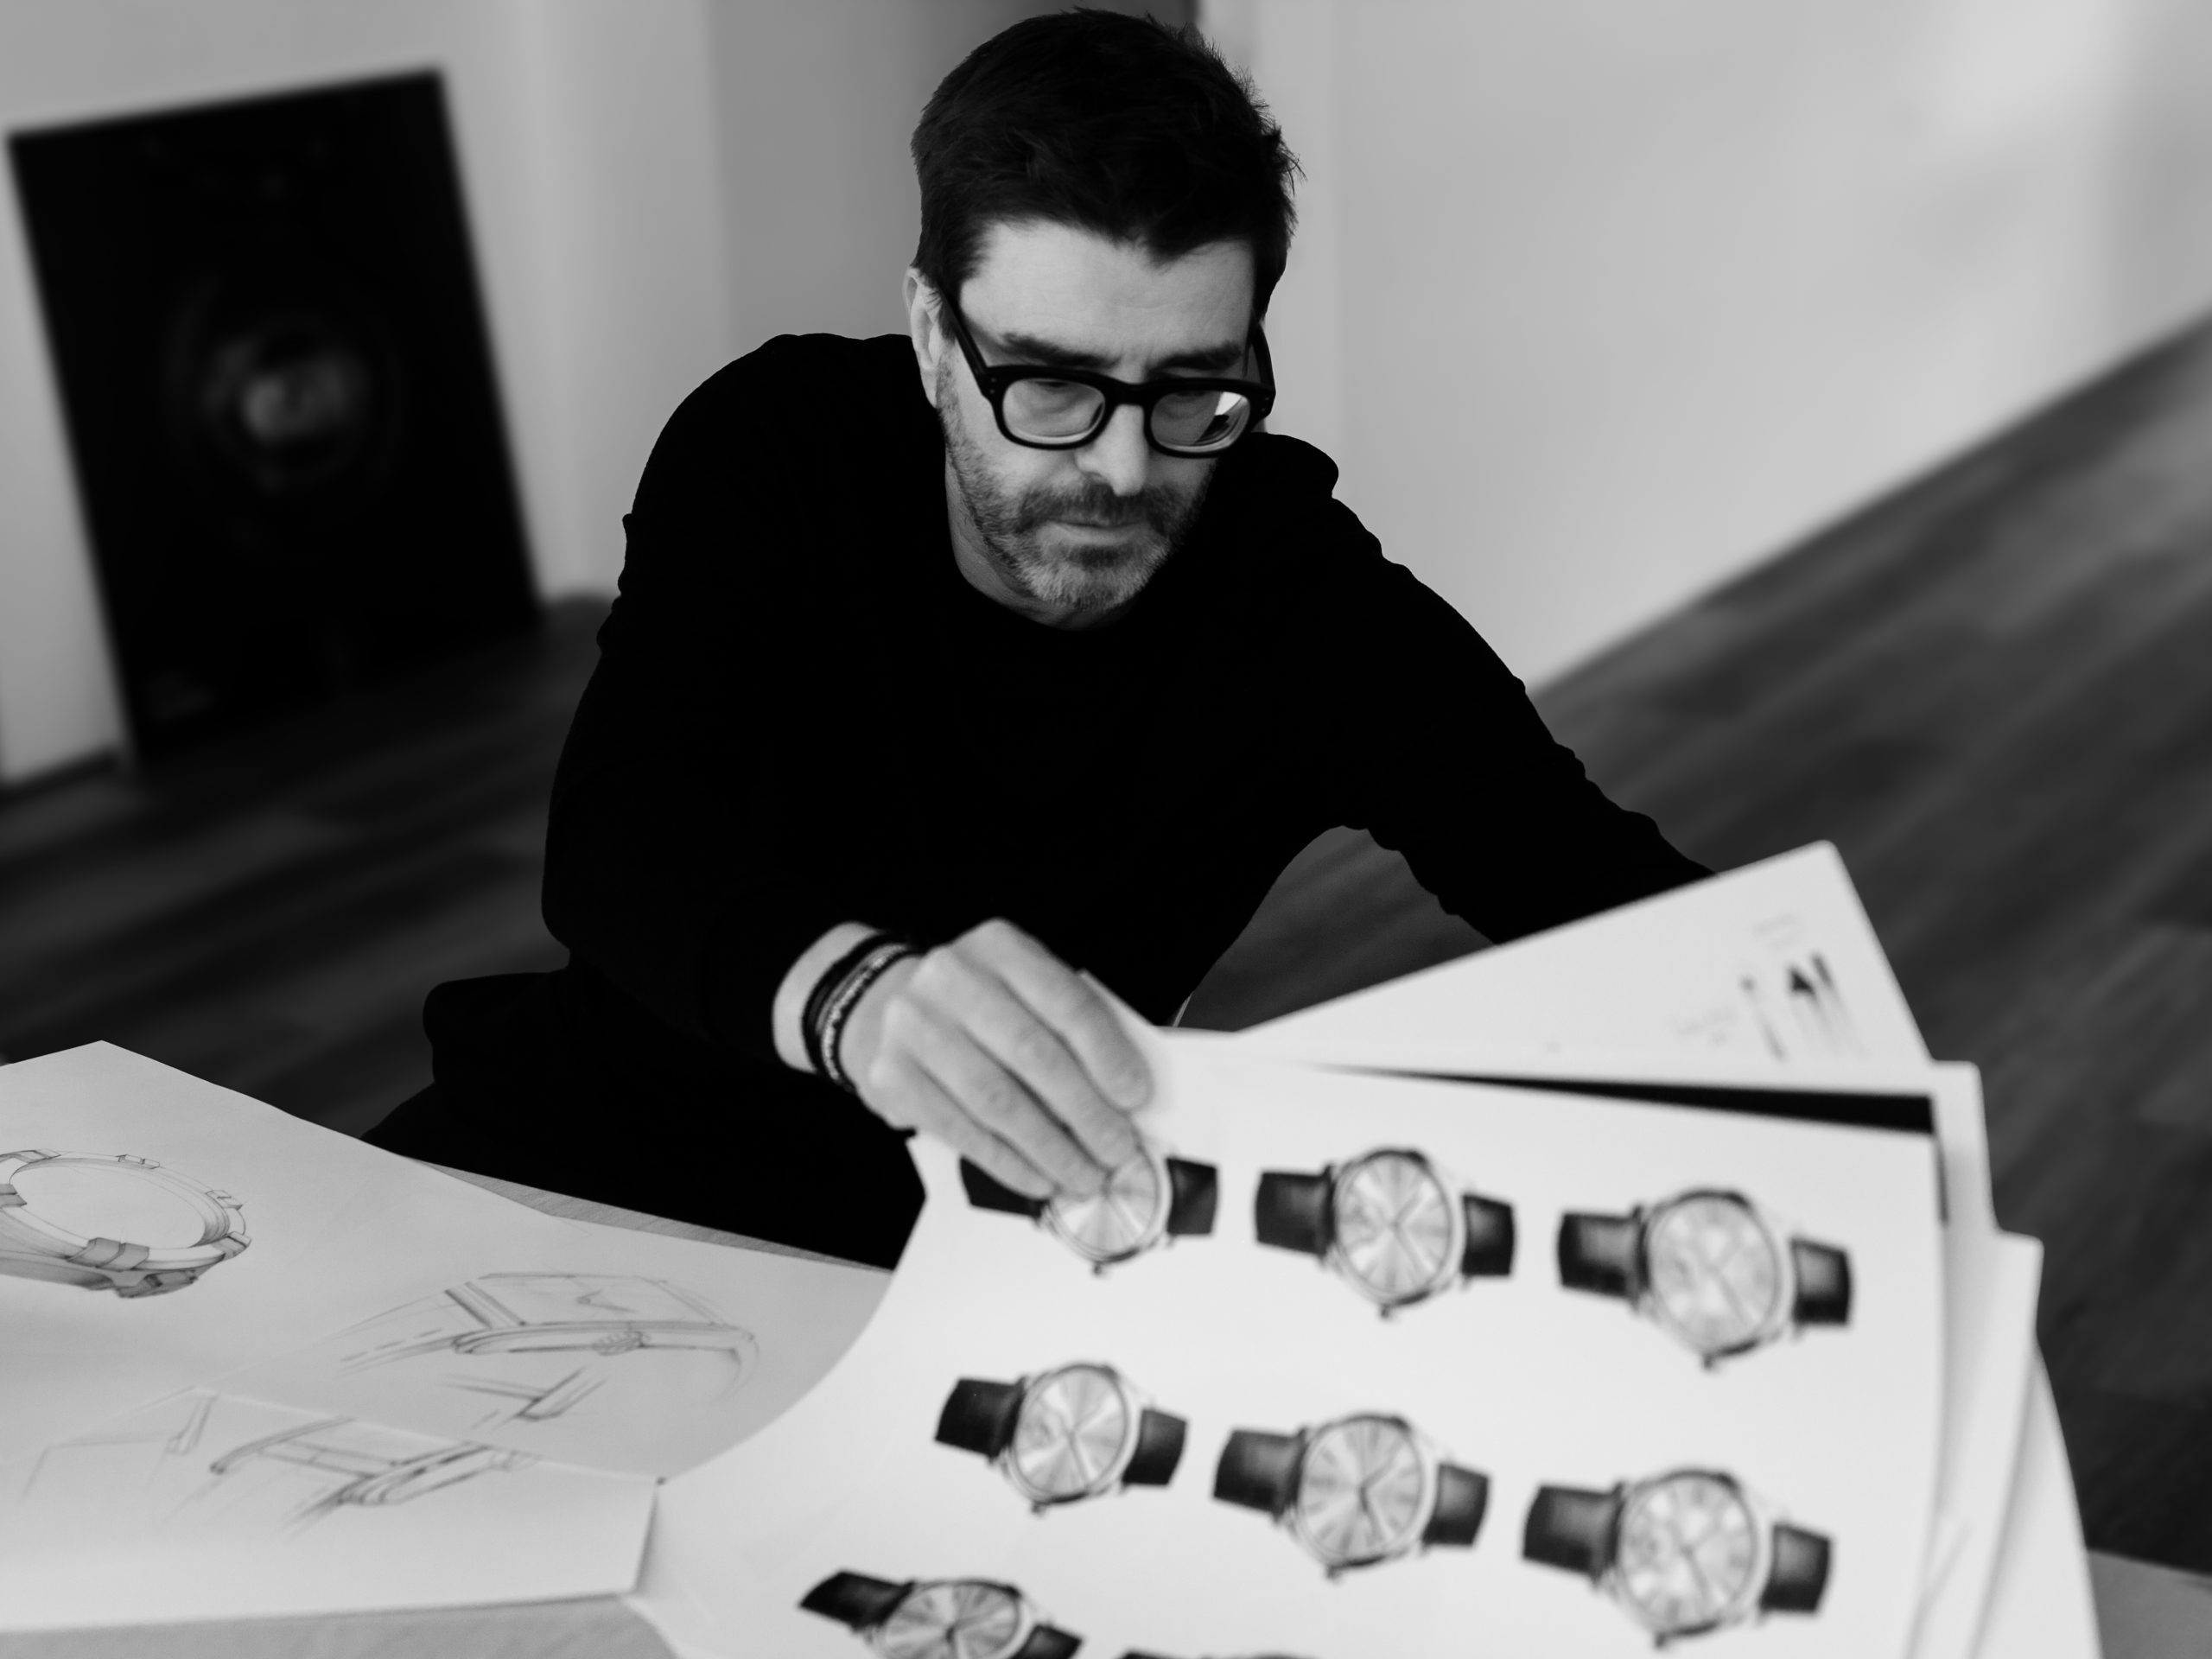 What You See Is Watch You Get — A Design Conversation with Manuel Romero, co-Founder of White